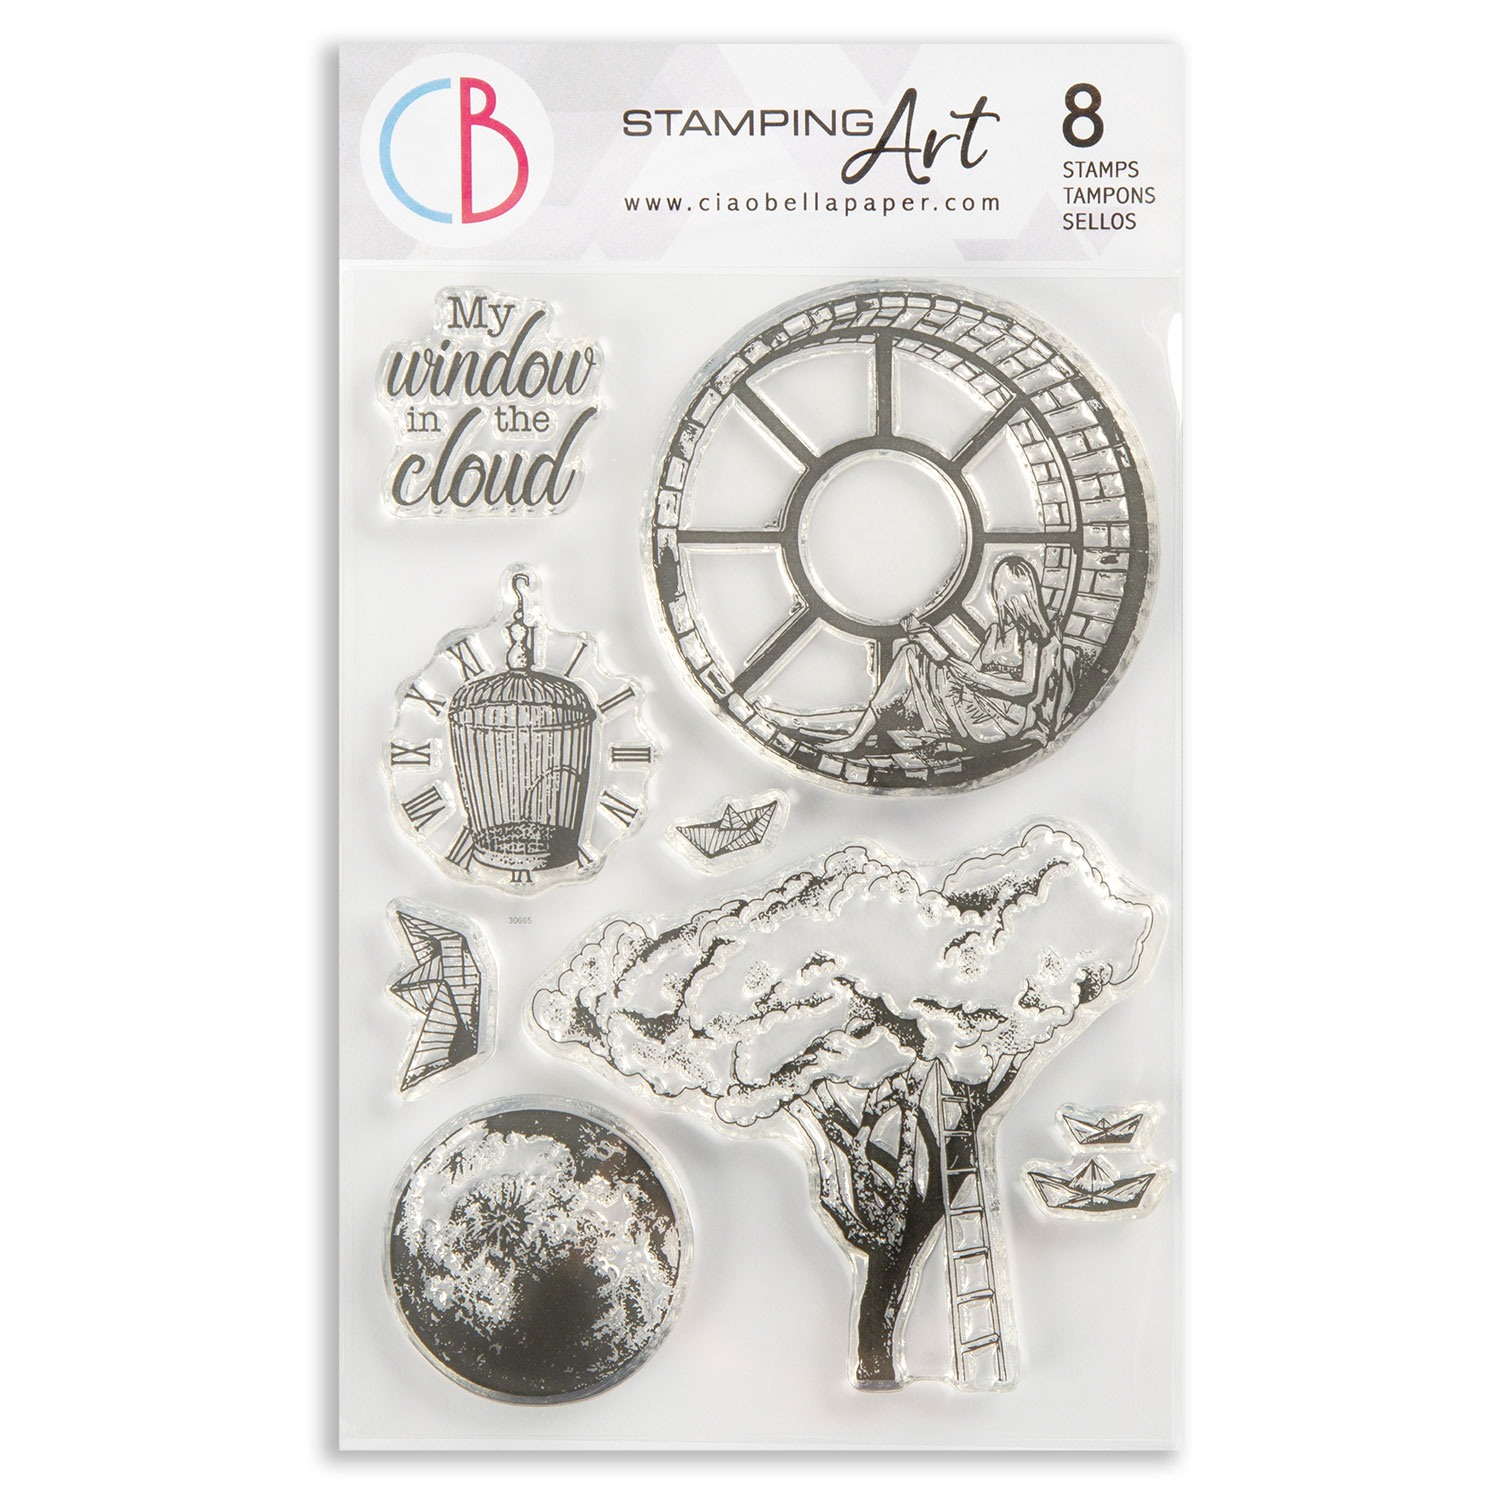 Ciao Bella 2 x 4x6" Stamp Sets - Choose any 2 - Windows In The Cloud